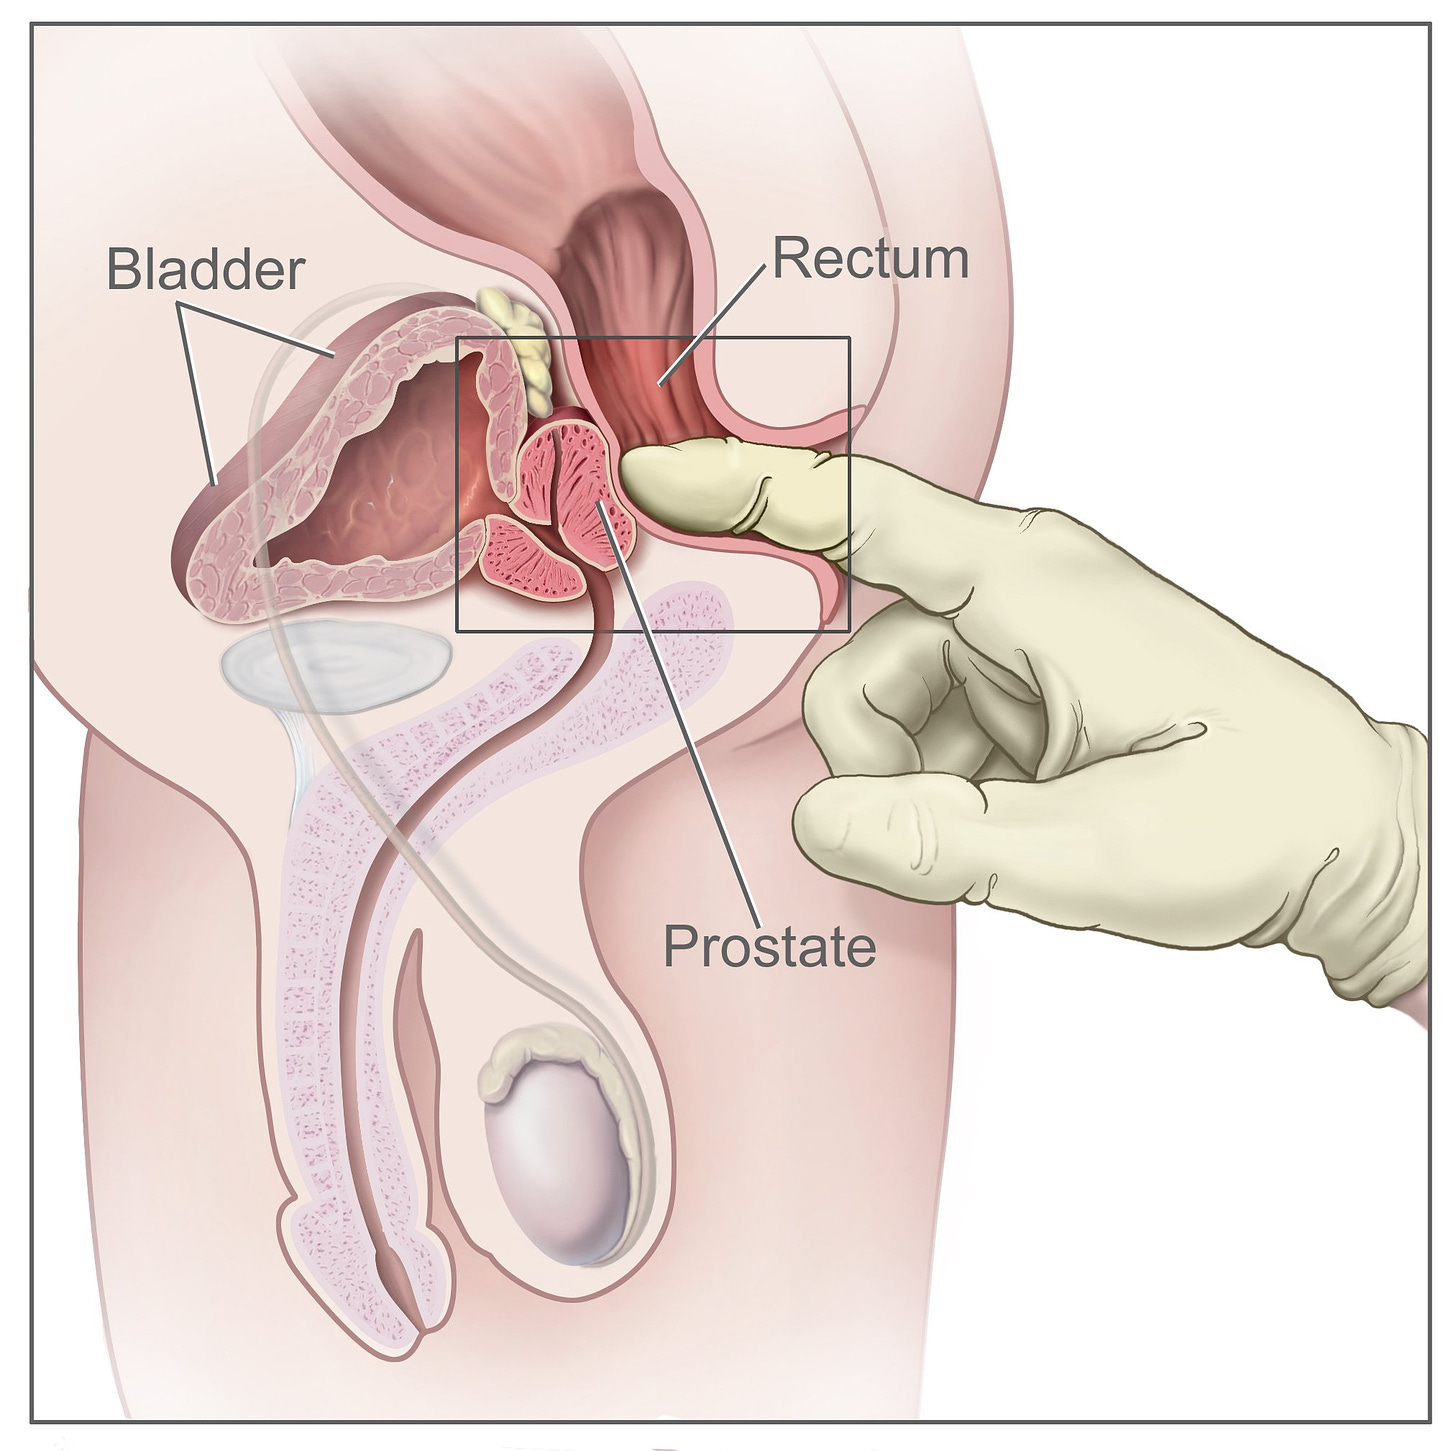 Finger of gloved hand presses against prostate in cross-sectional view.